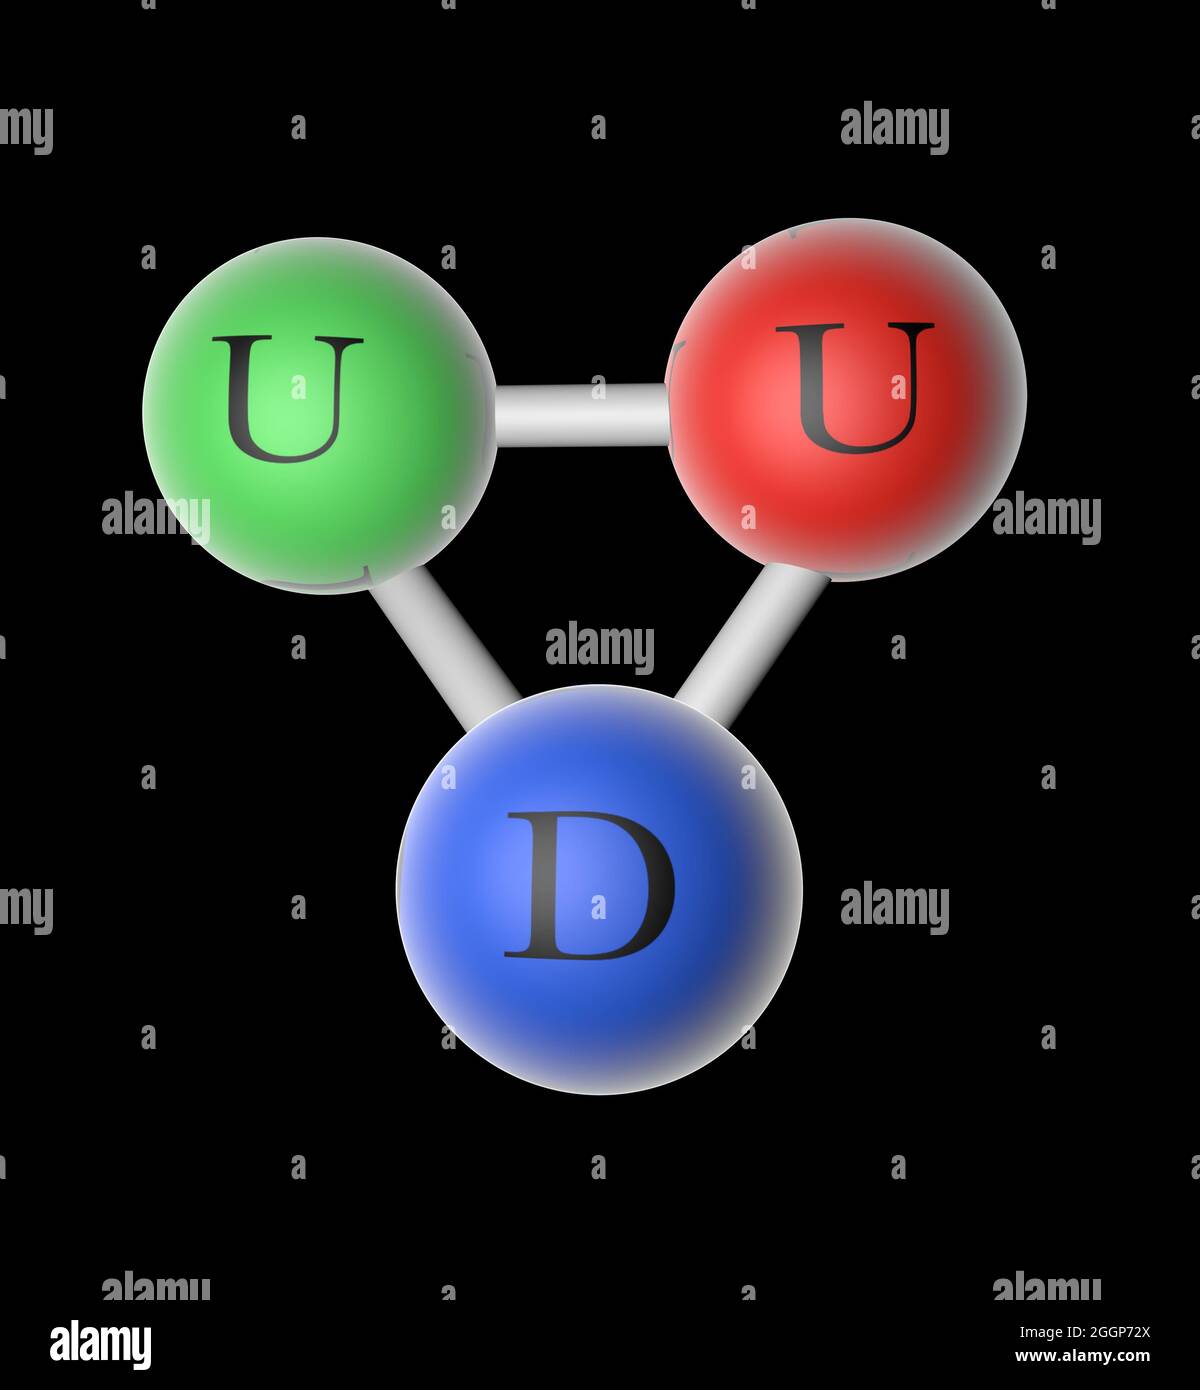 Illustration of a proton, a subatomic particle with a positive electric charge composed of two up quarks and one  down quark. Stock Photo